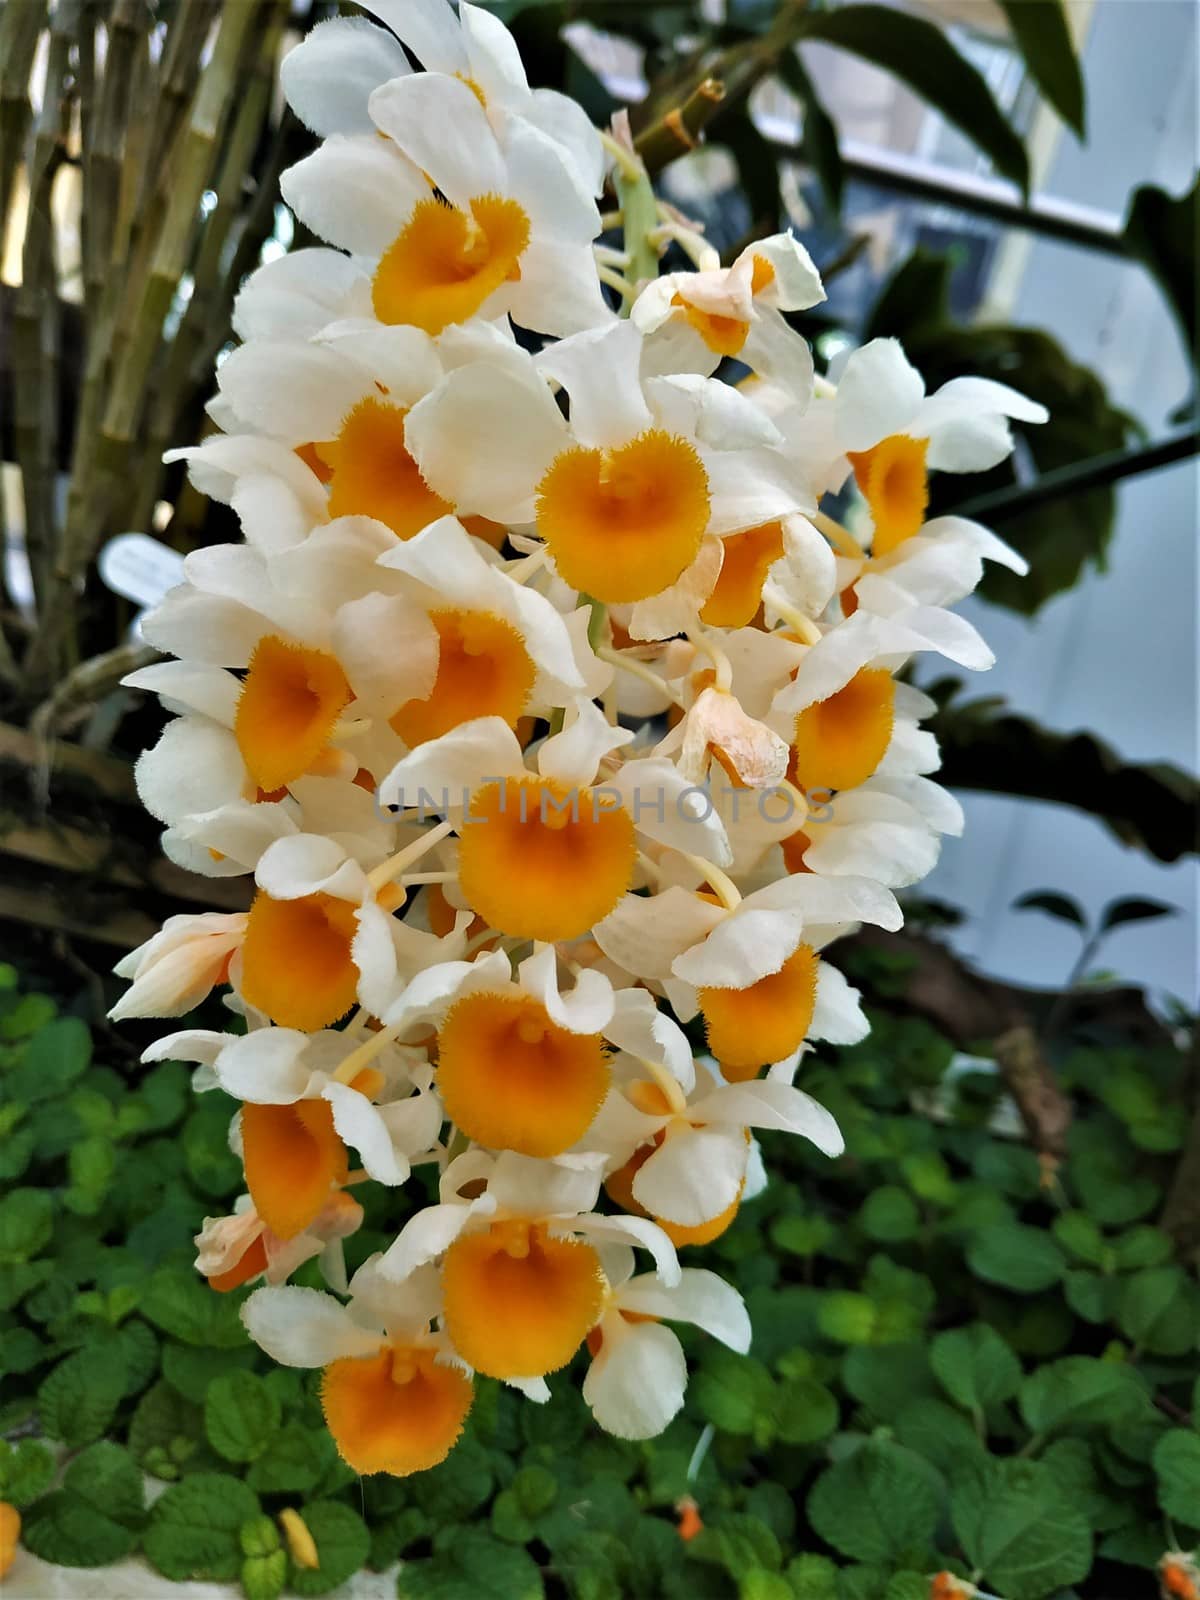 Dendrobium thyrsiflorum with large blossoms spotted in a greenhouse by pisces2386